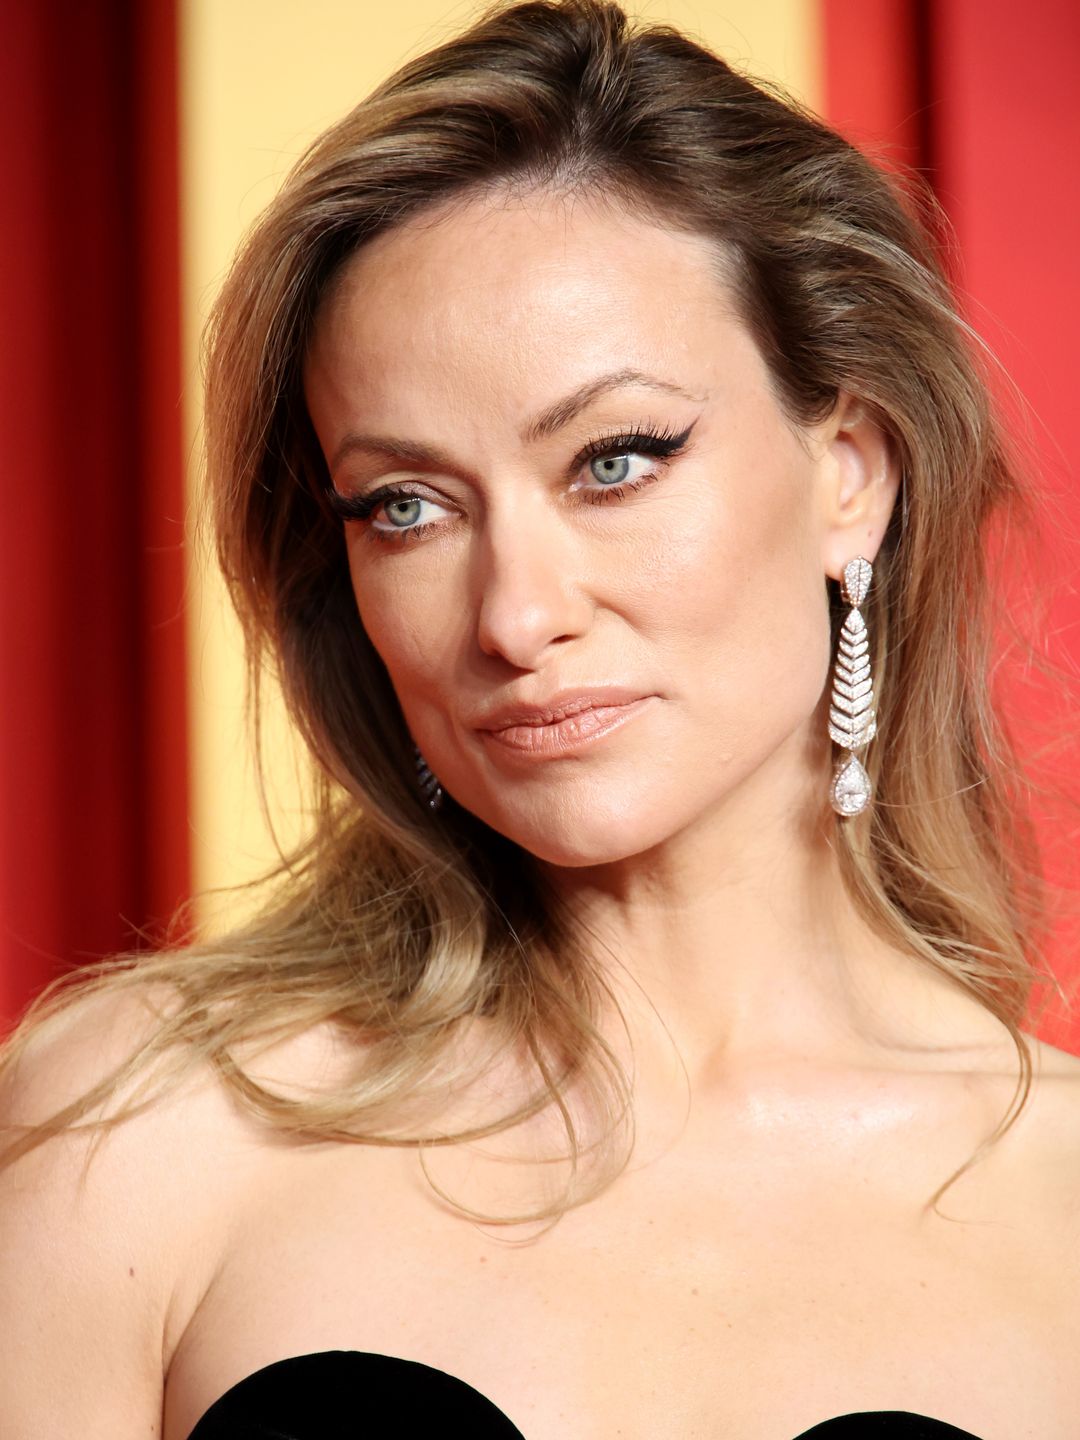 Olivia Wilde with skinny brows on the red carpet